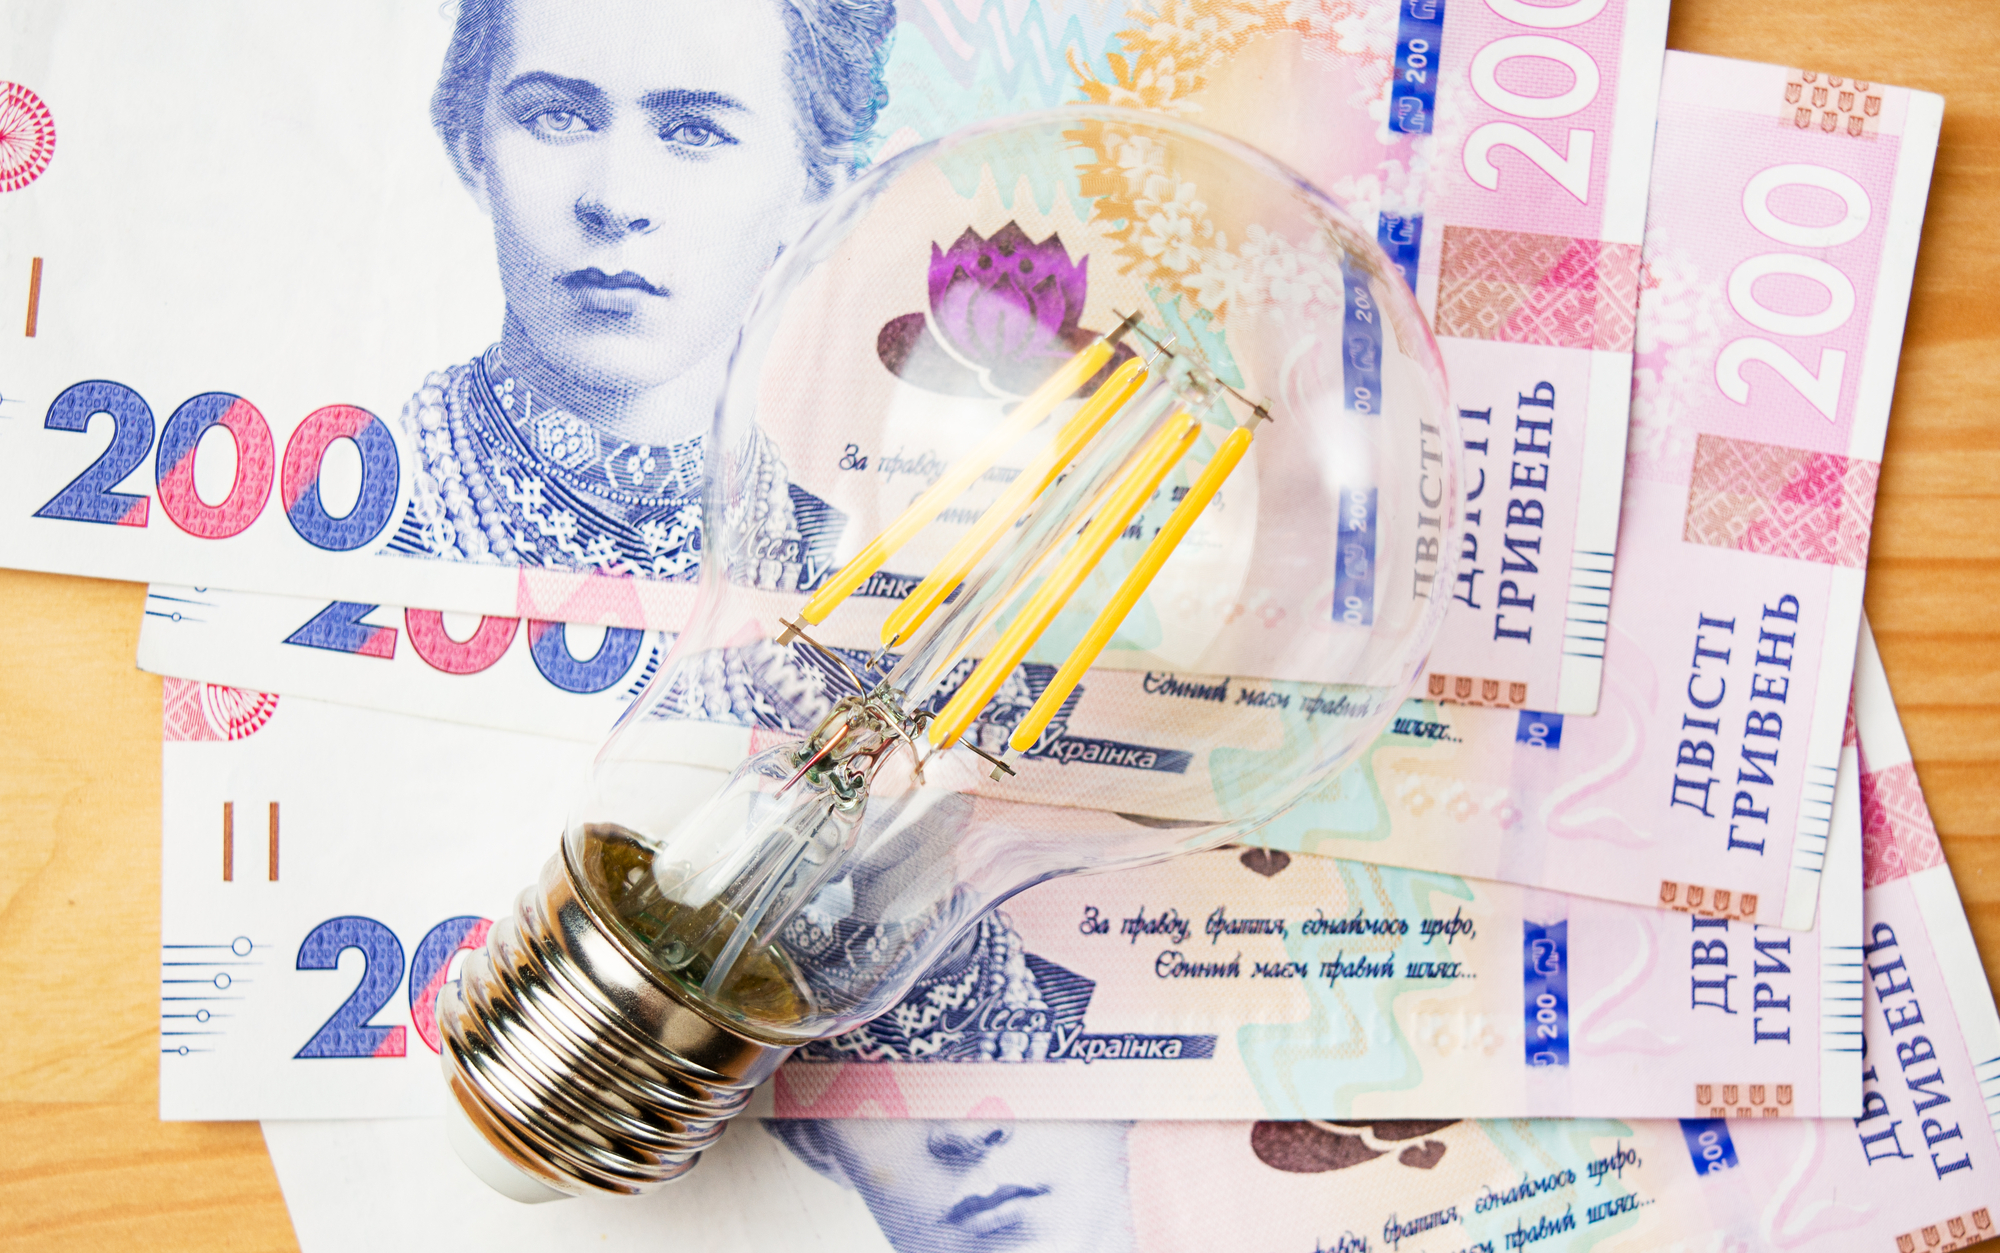 The concept of paying utility bills. The concept of electricity supply in Ukraine. A lamp and Ukrainian 200 hryvnia bills. Top view. Close-up.